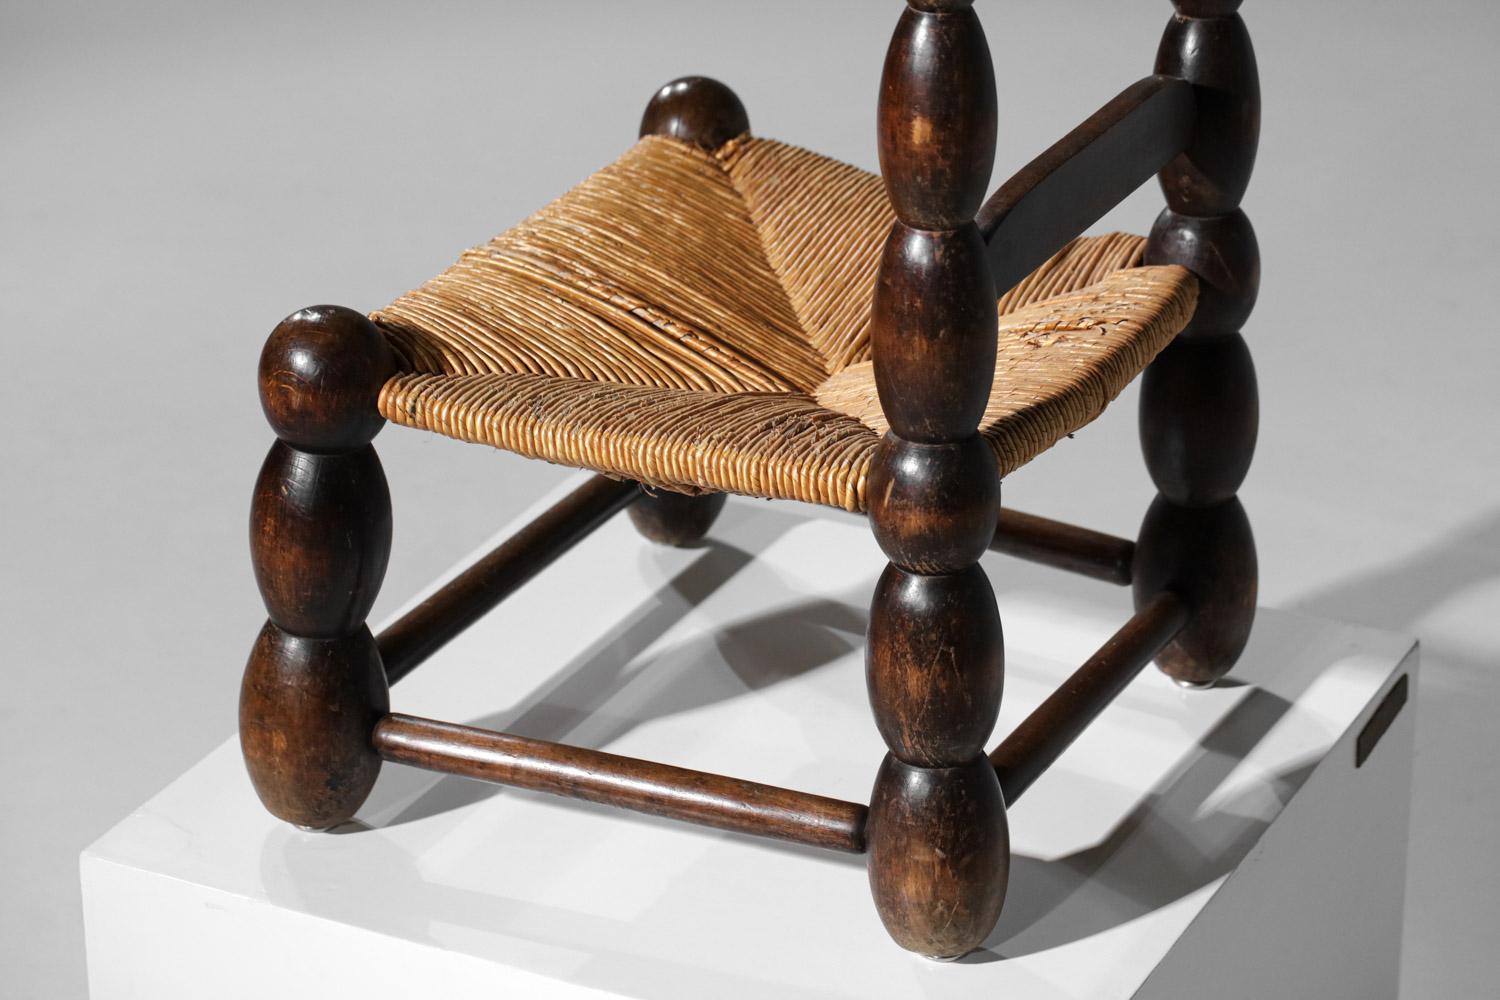 Mid-20th Century Rustic Straw Chair in Carved Wood with Boxwood Finish French Brutalist Folk Art